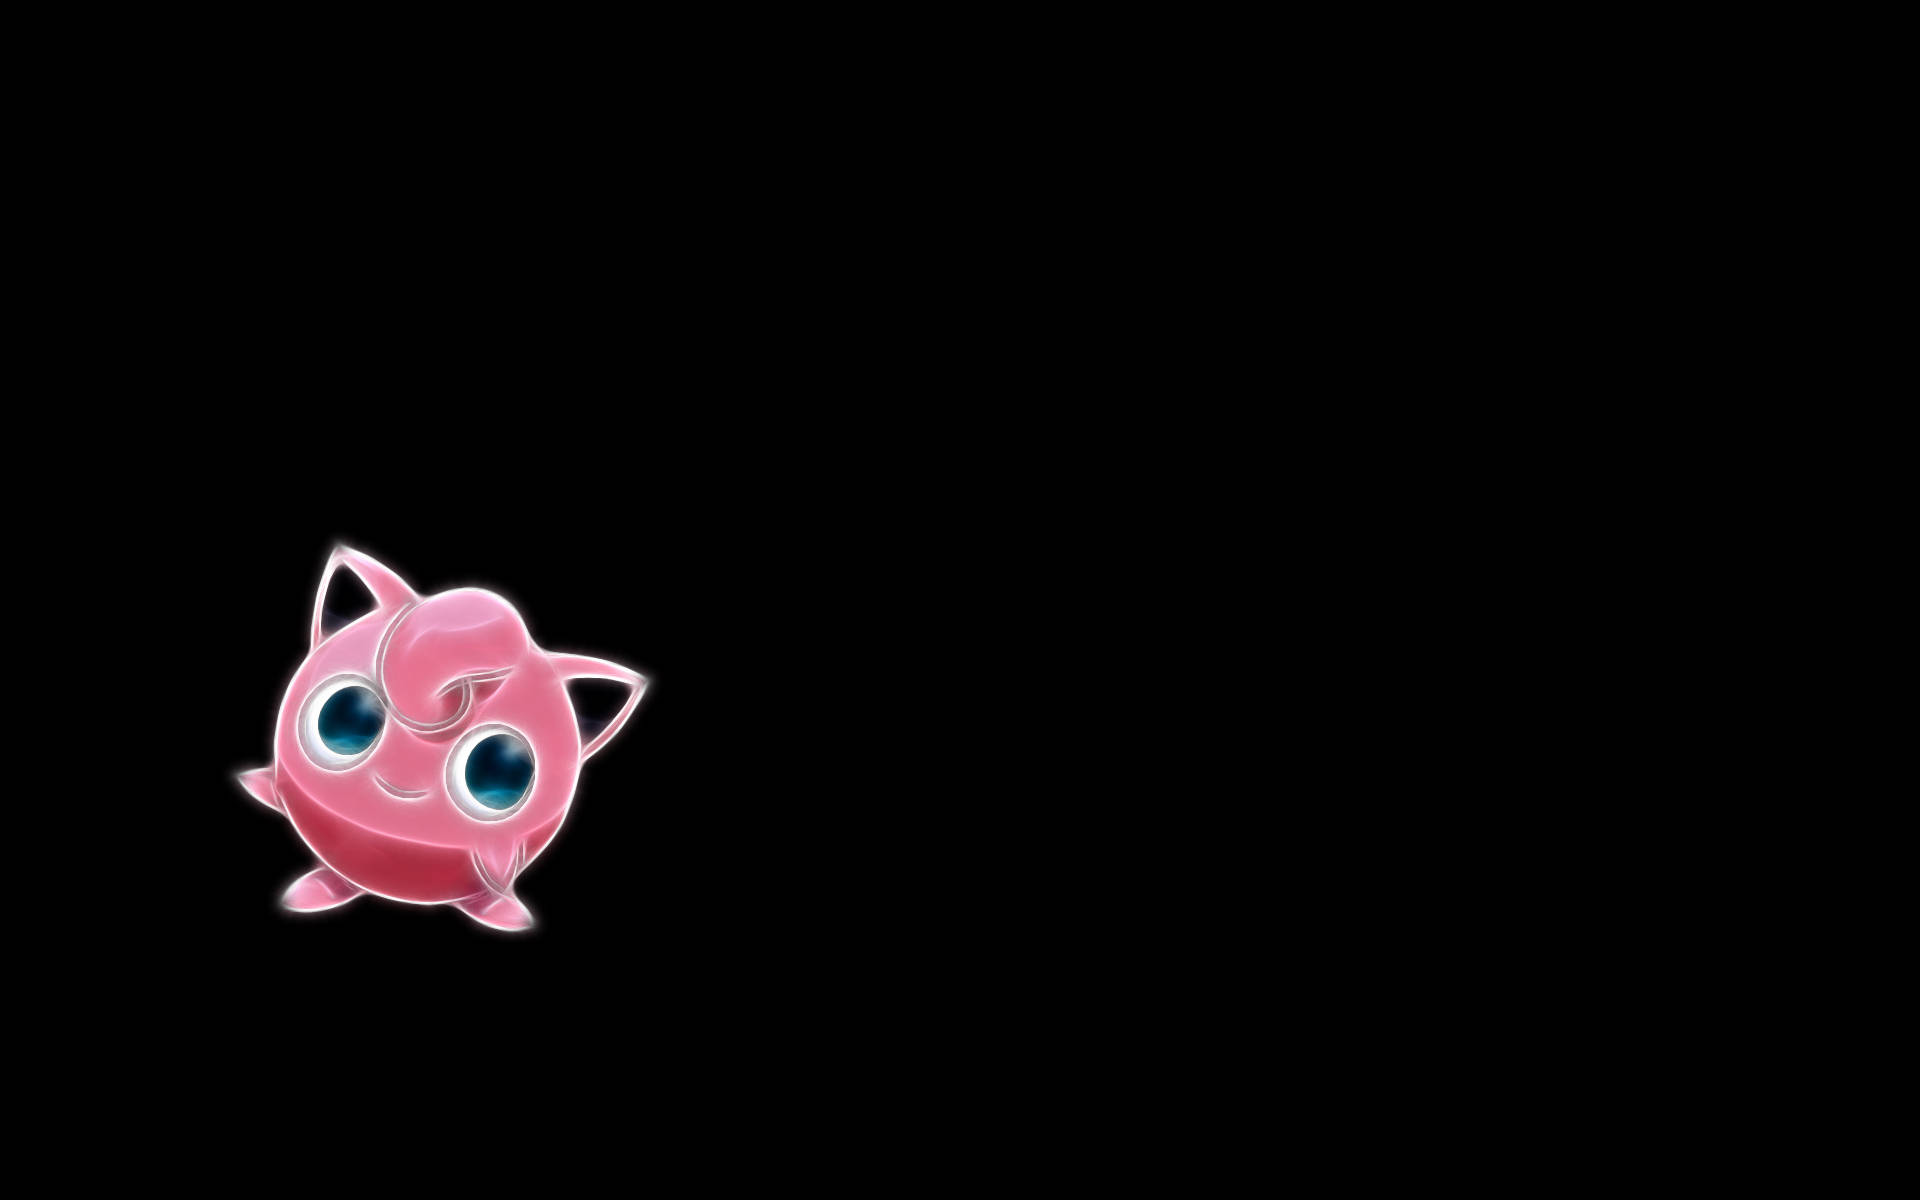 Brighten Up Your Day With A Jigglypuff